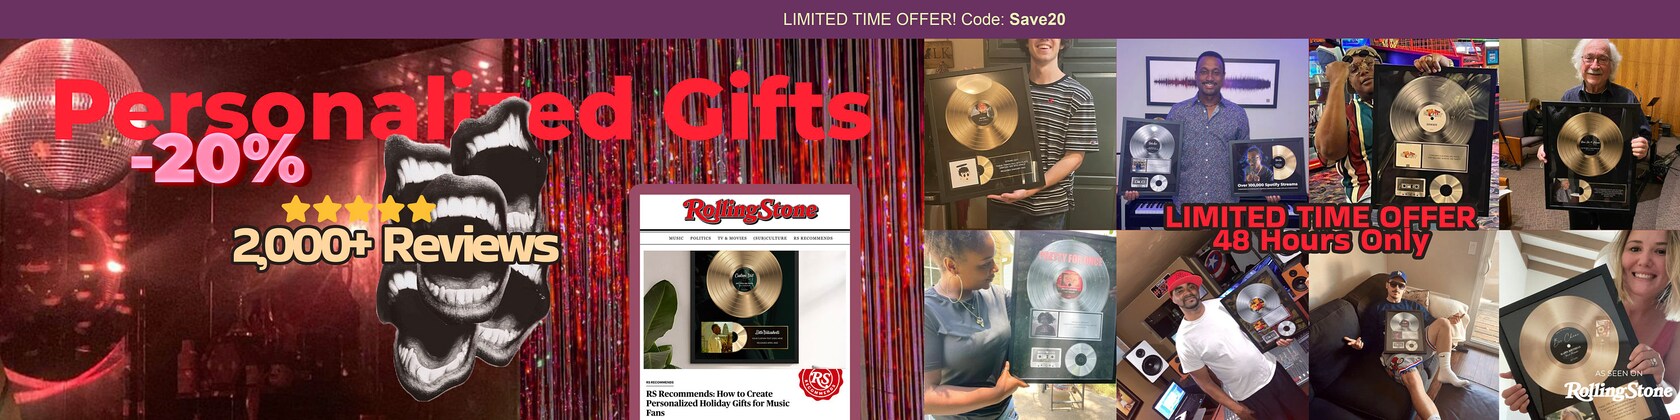 Music Tech, Gadgets, Gifts for Music Fans: Rolling Stone Gifts 2019